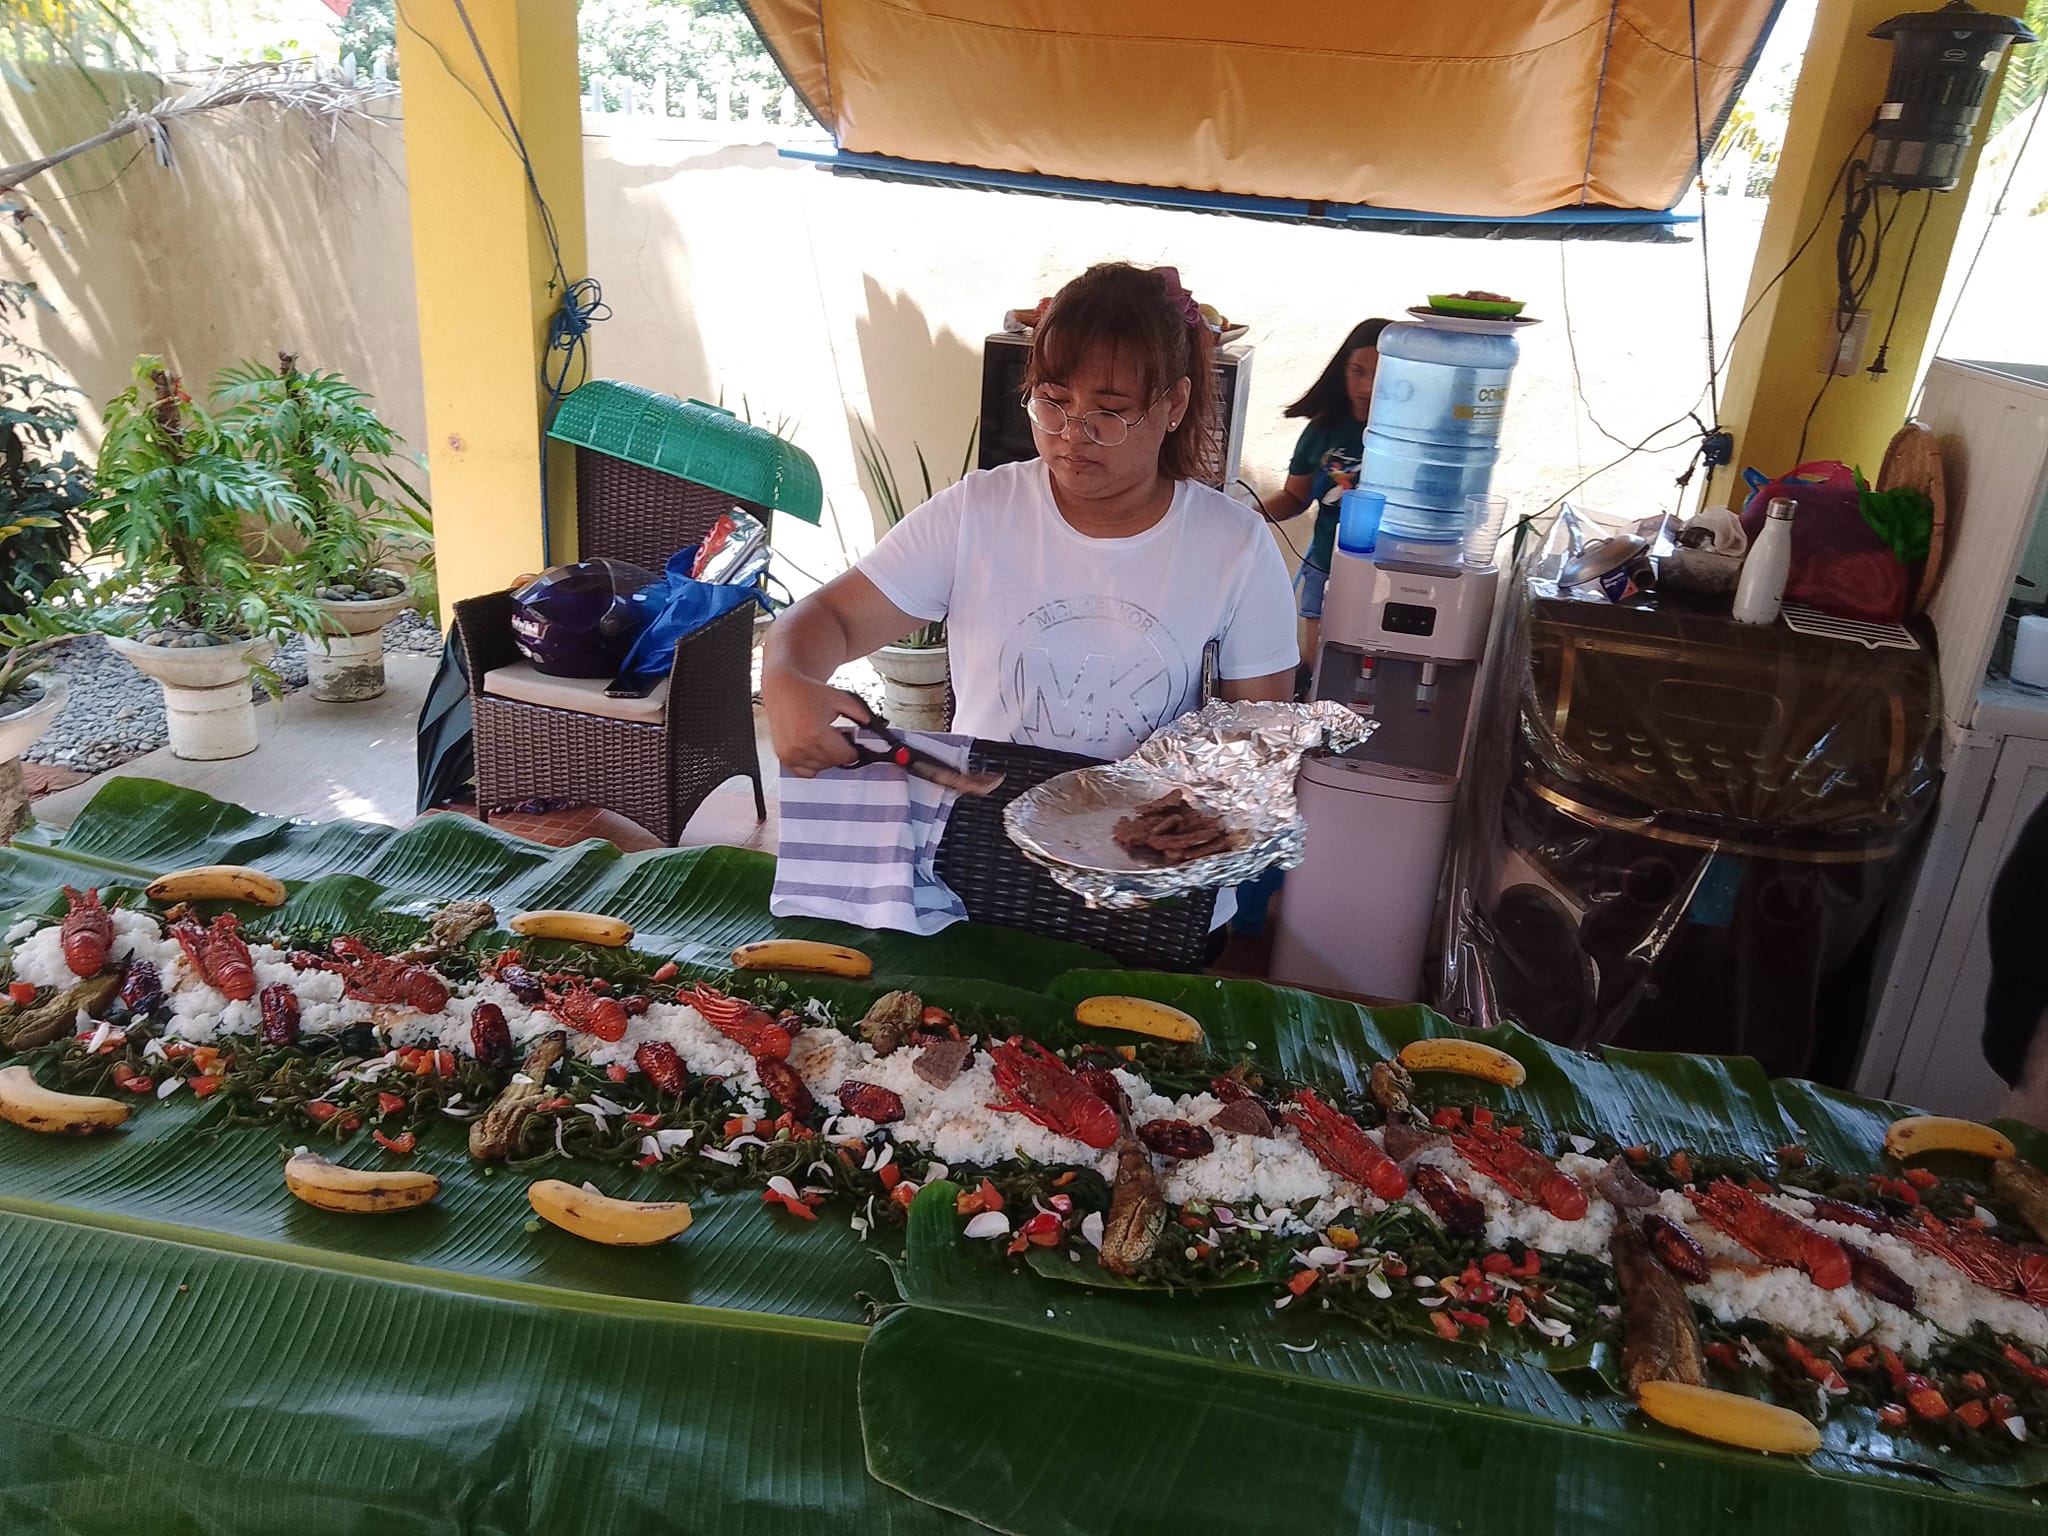 boodle fight before the Holy Week